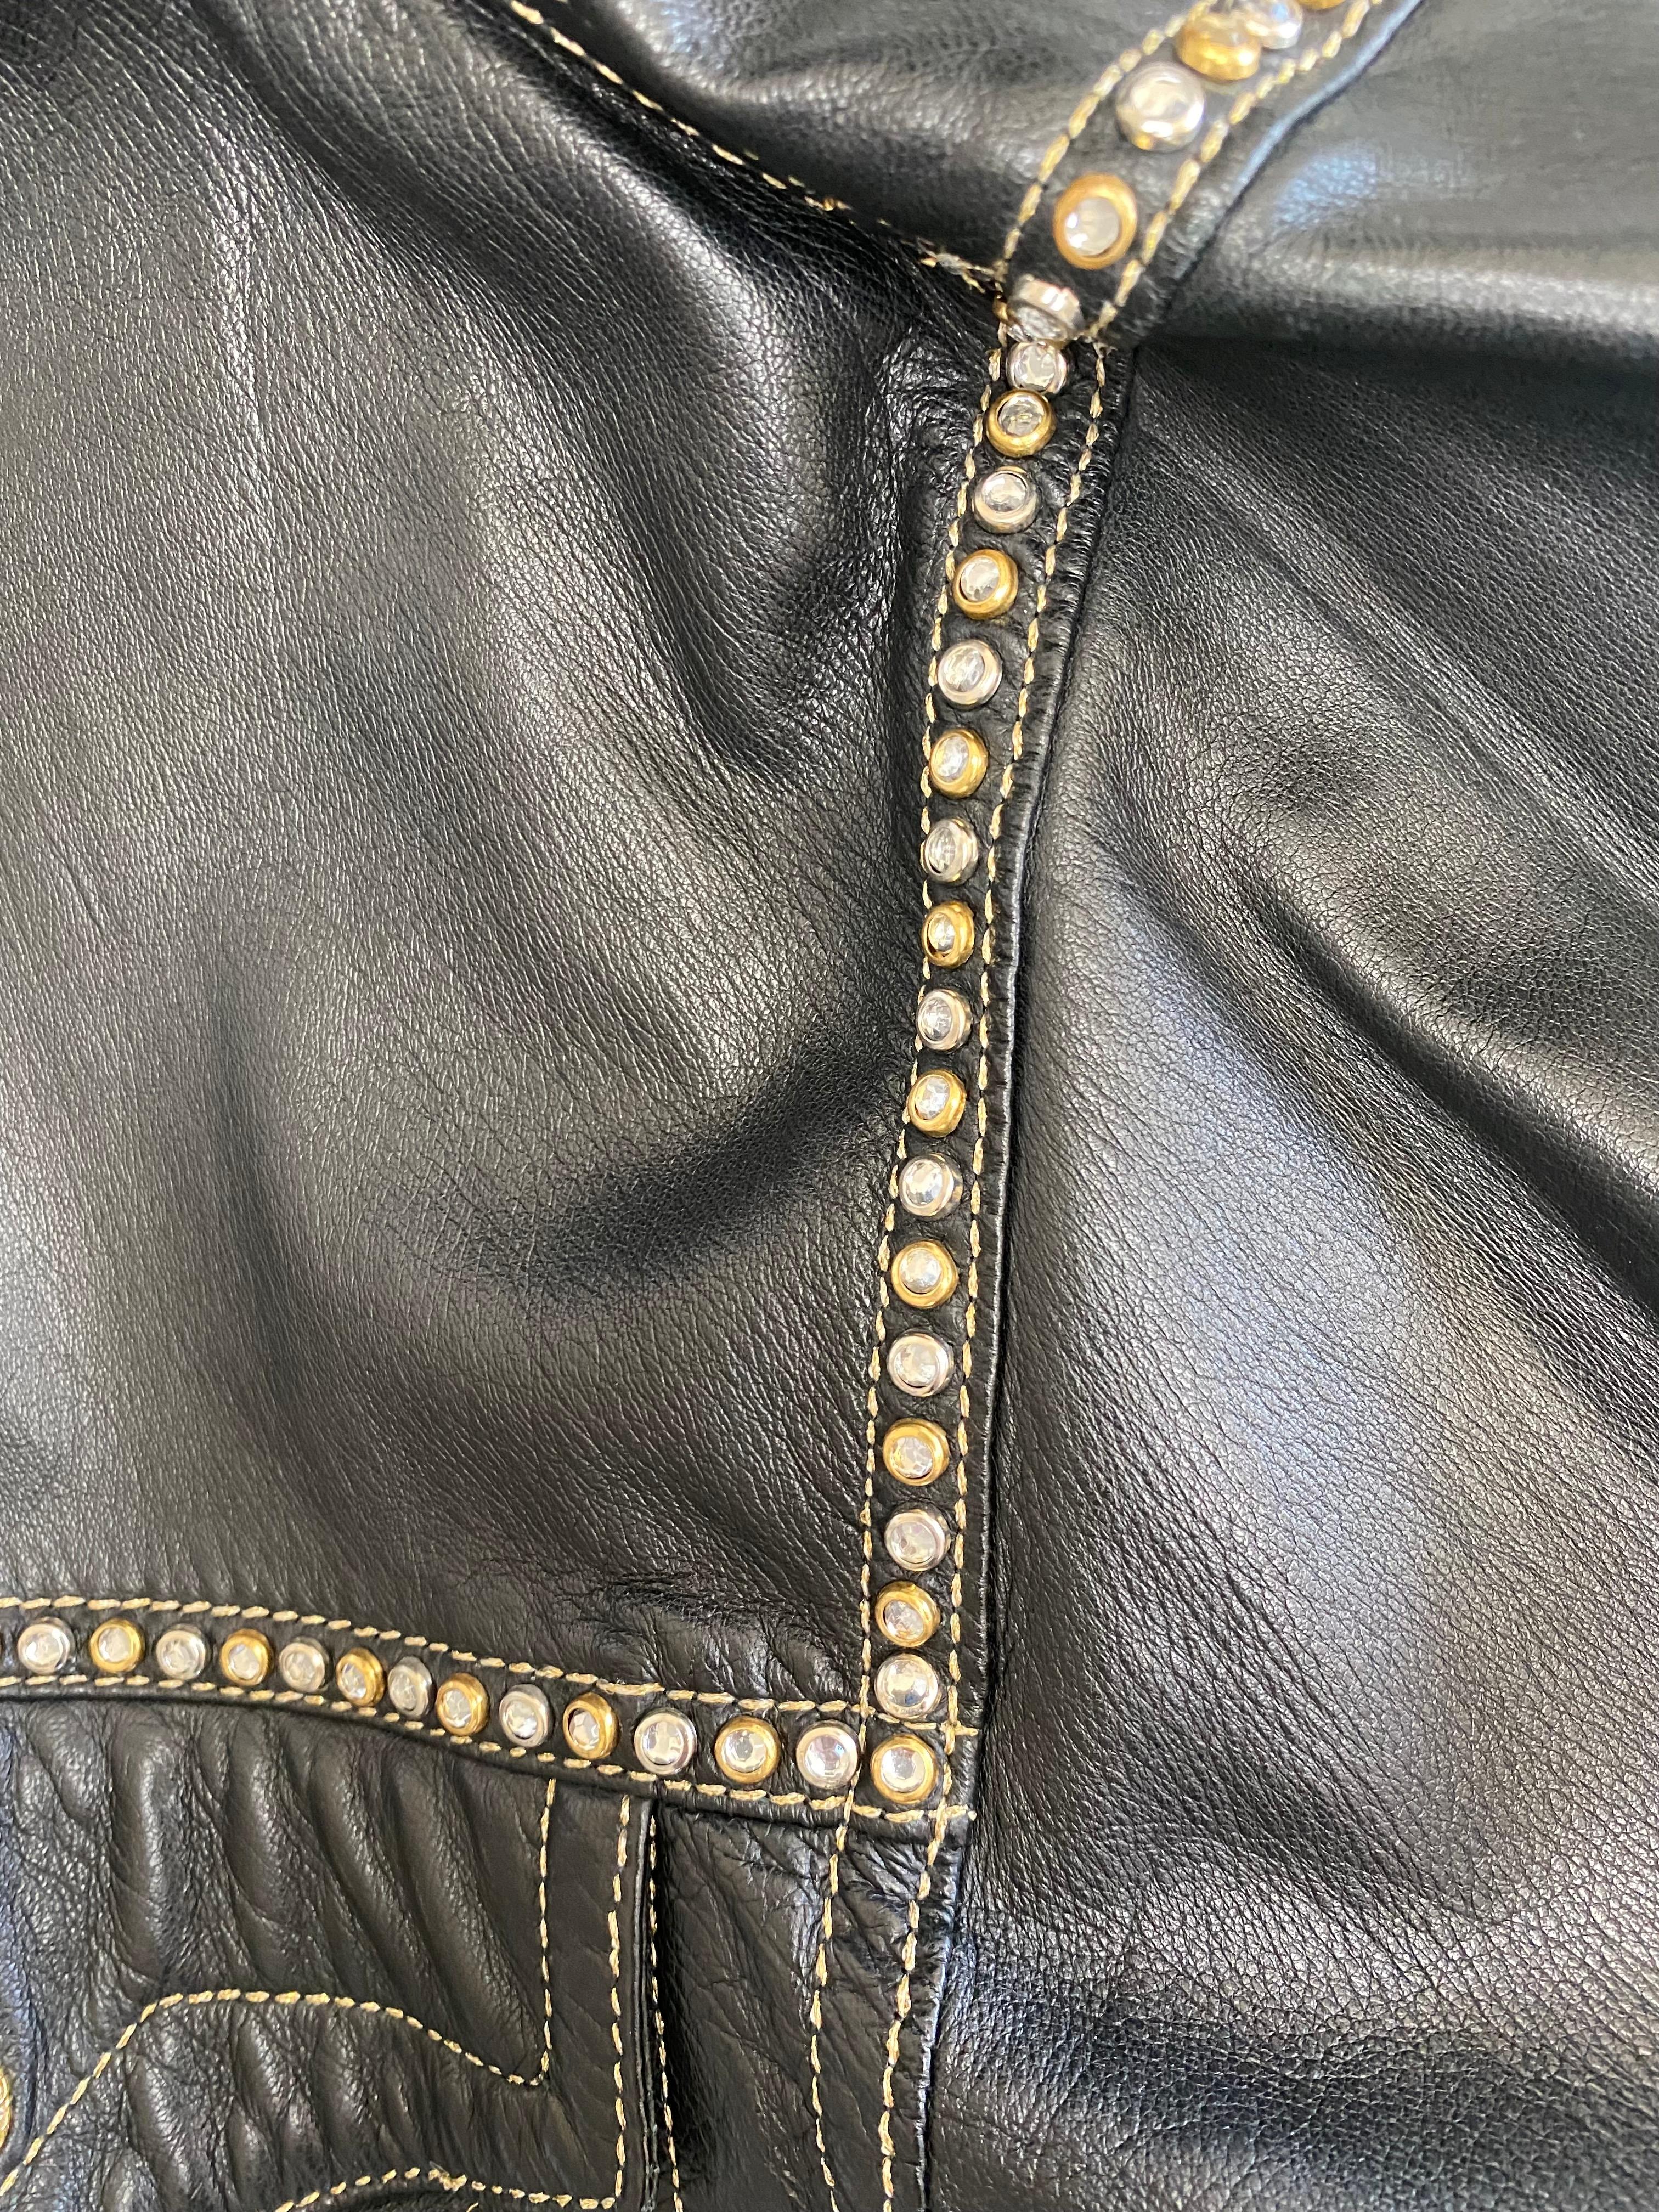 F/W 1992 Gianni Versace Runway 'Miss S&M' Rhinestone Studded Leather Top In Good Condition In West Hollywood, CA